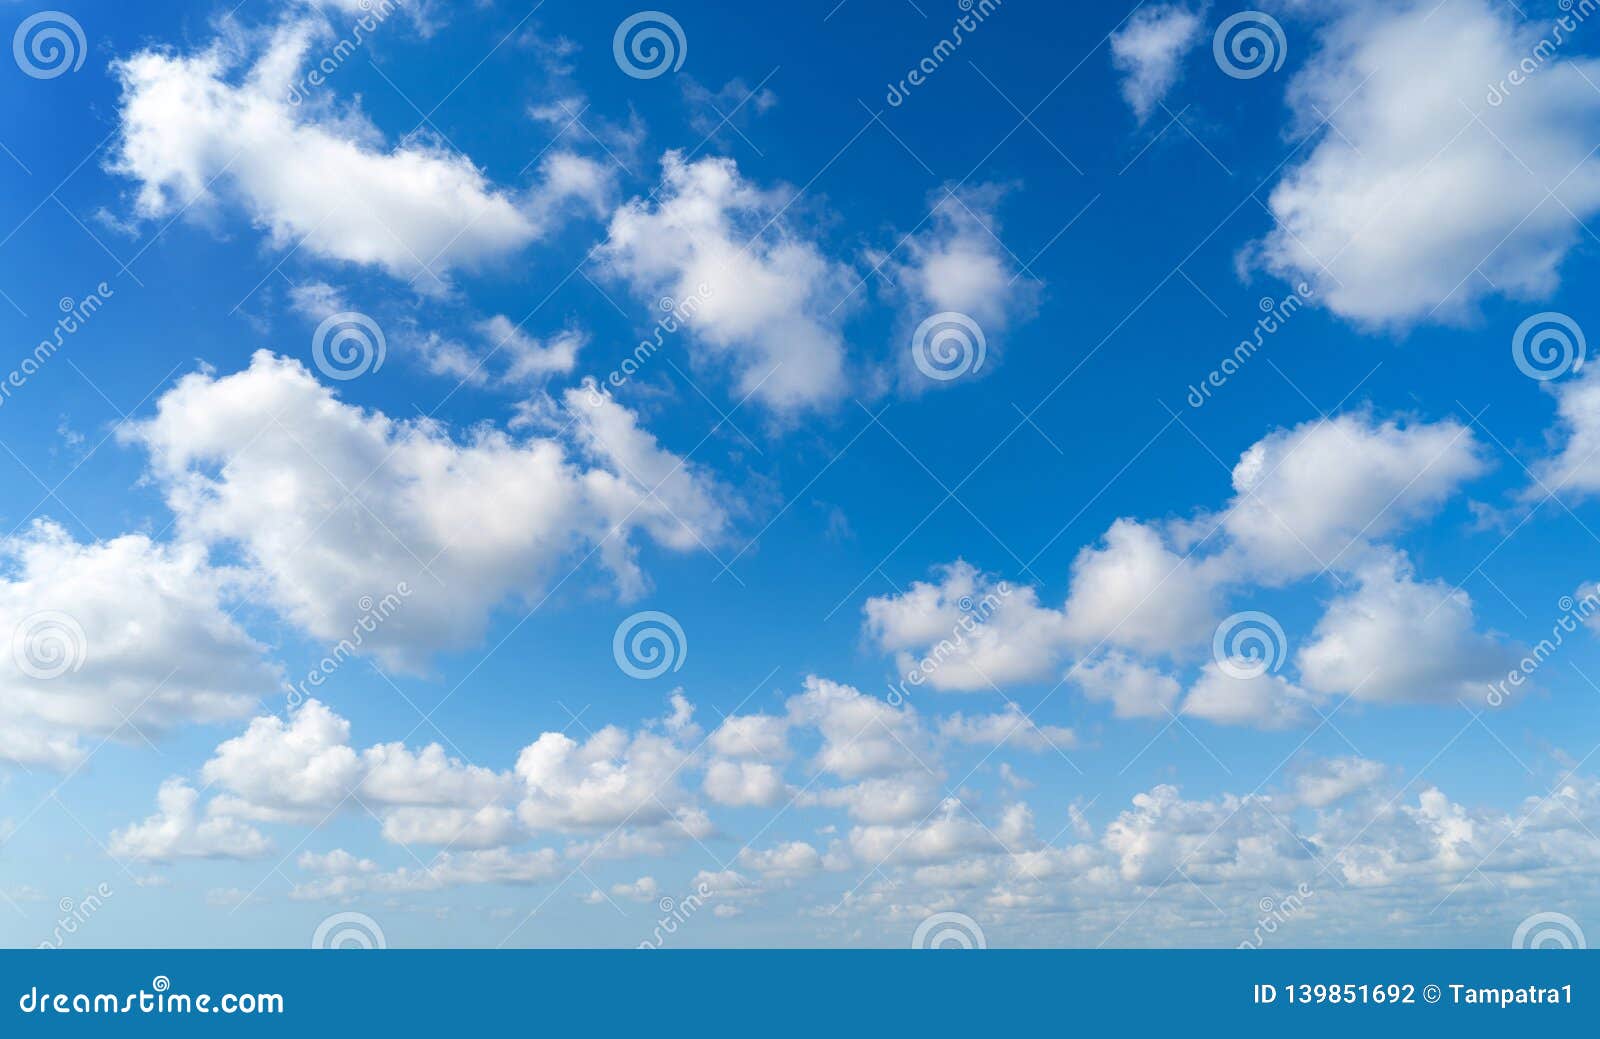 clear blue sky with white fluffy clouds. nature background